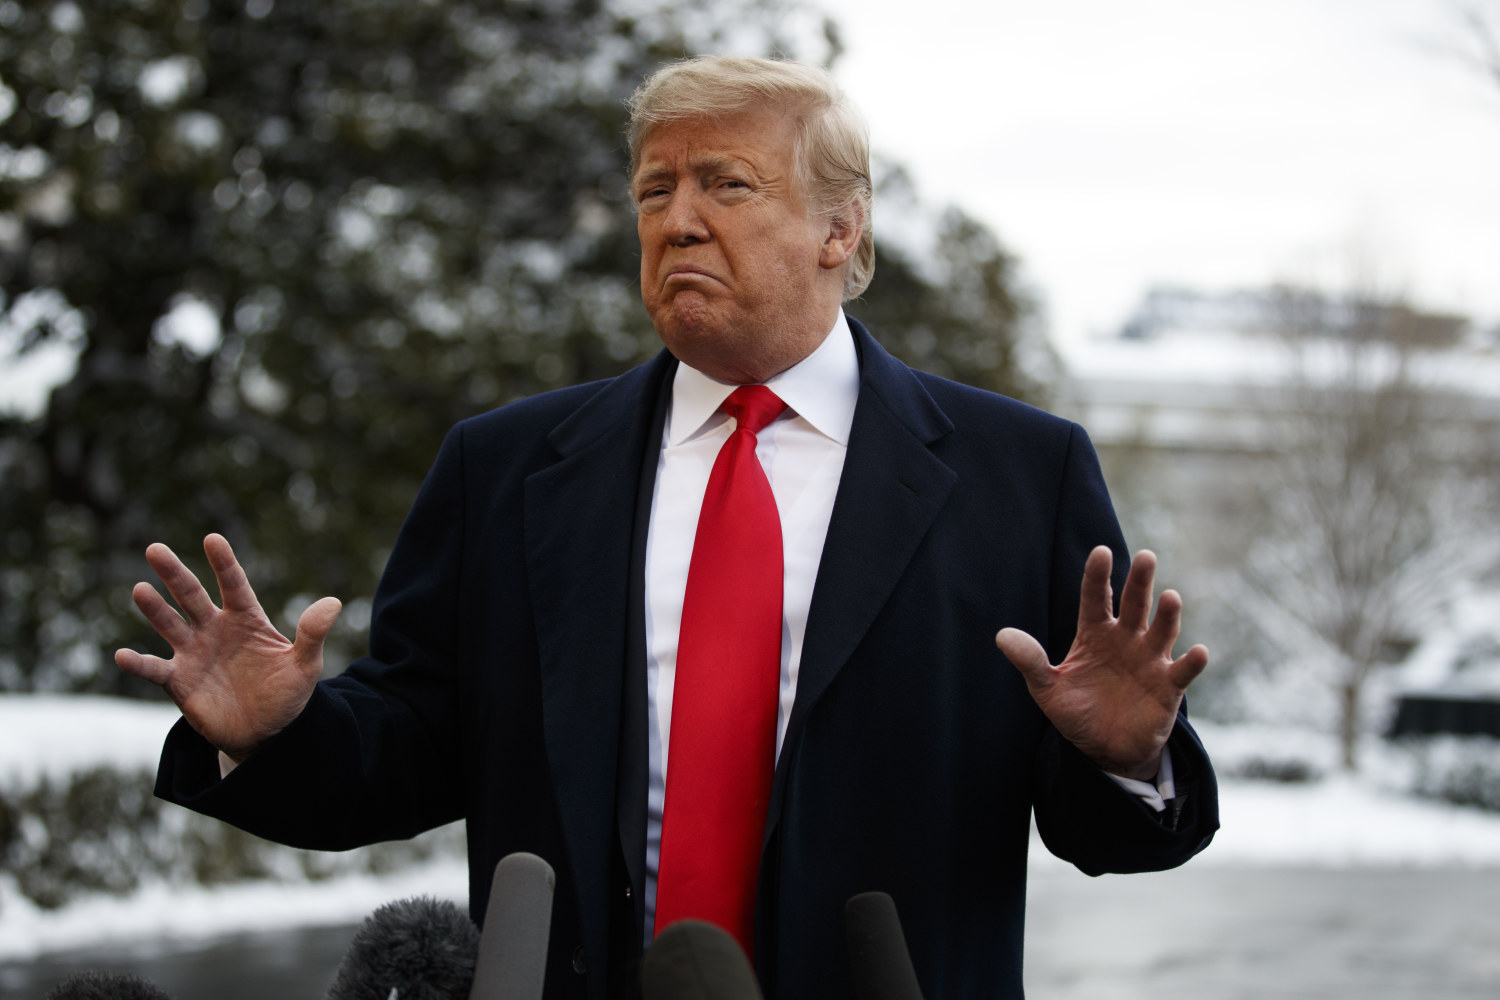 Trump declares he'll 'never back down' in shutdown fight